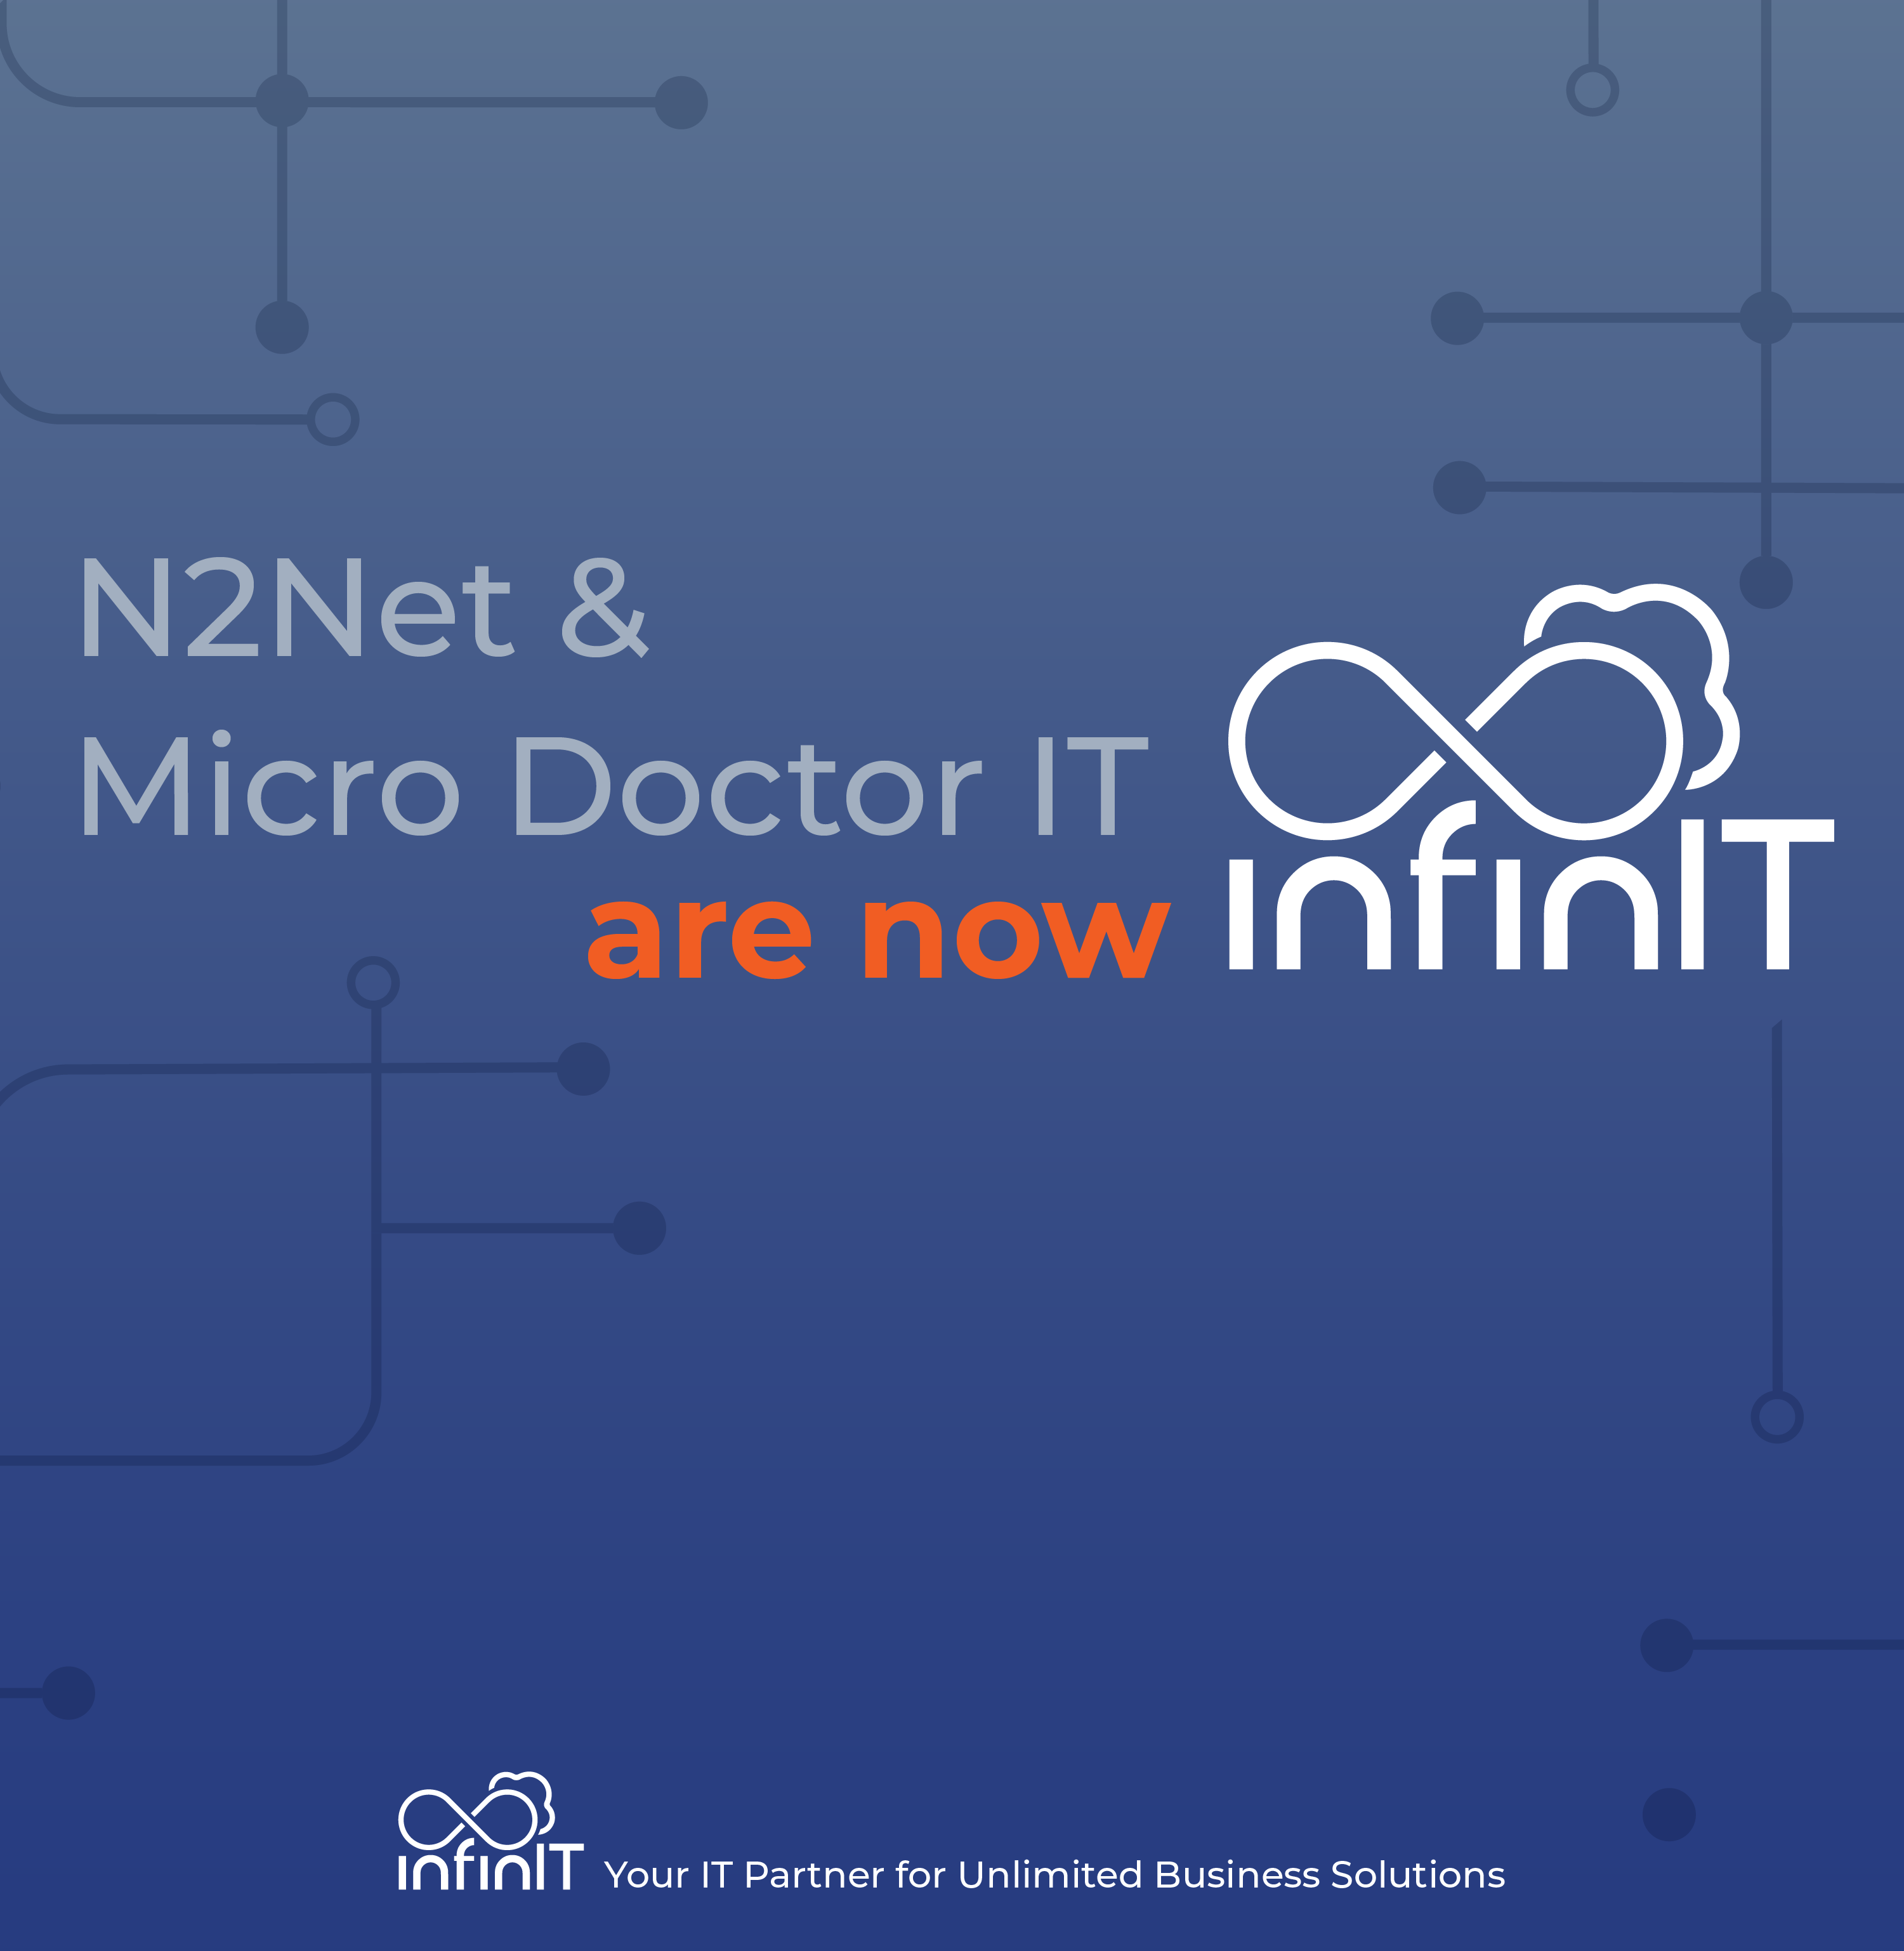 n2net-microdoctorit-are-now-infinit